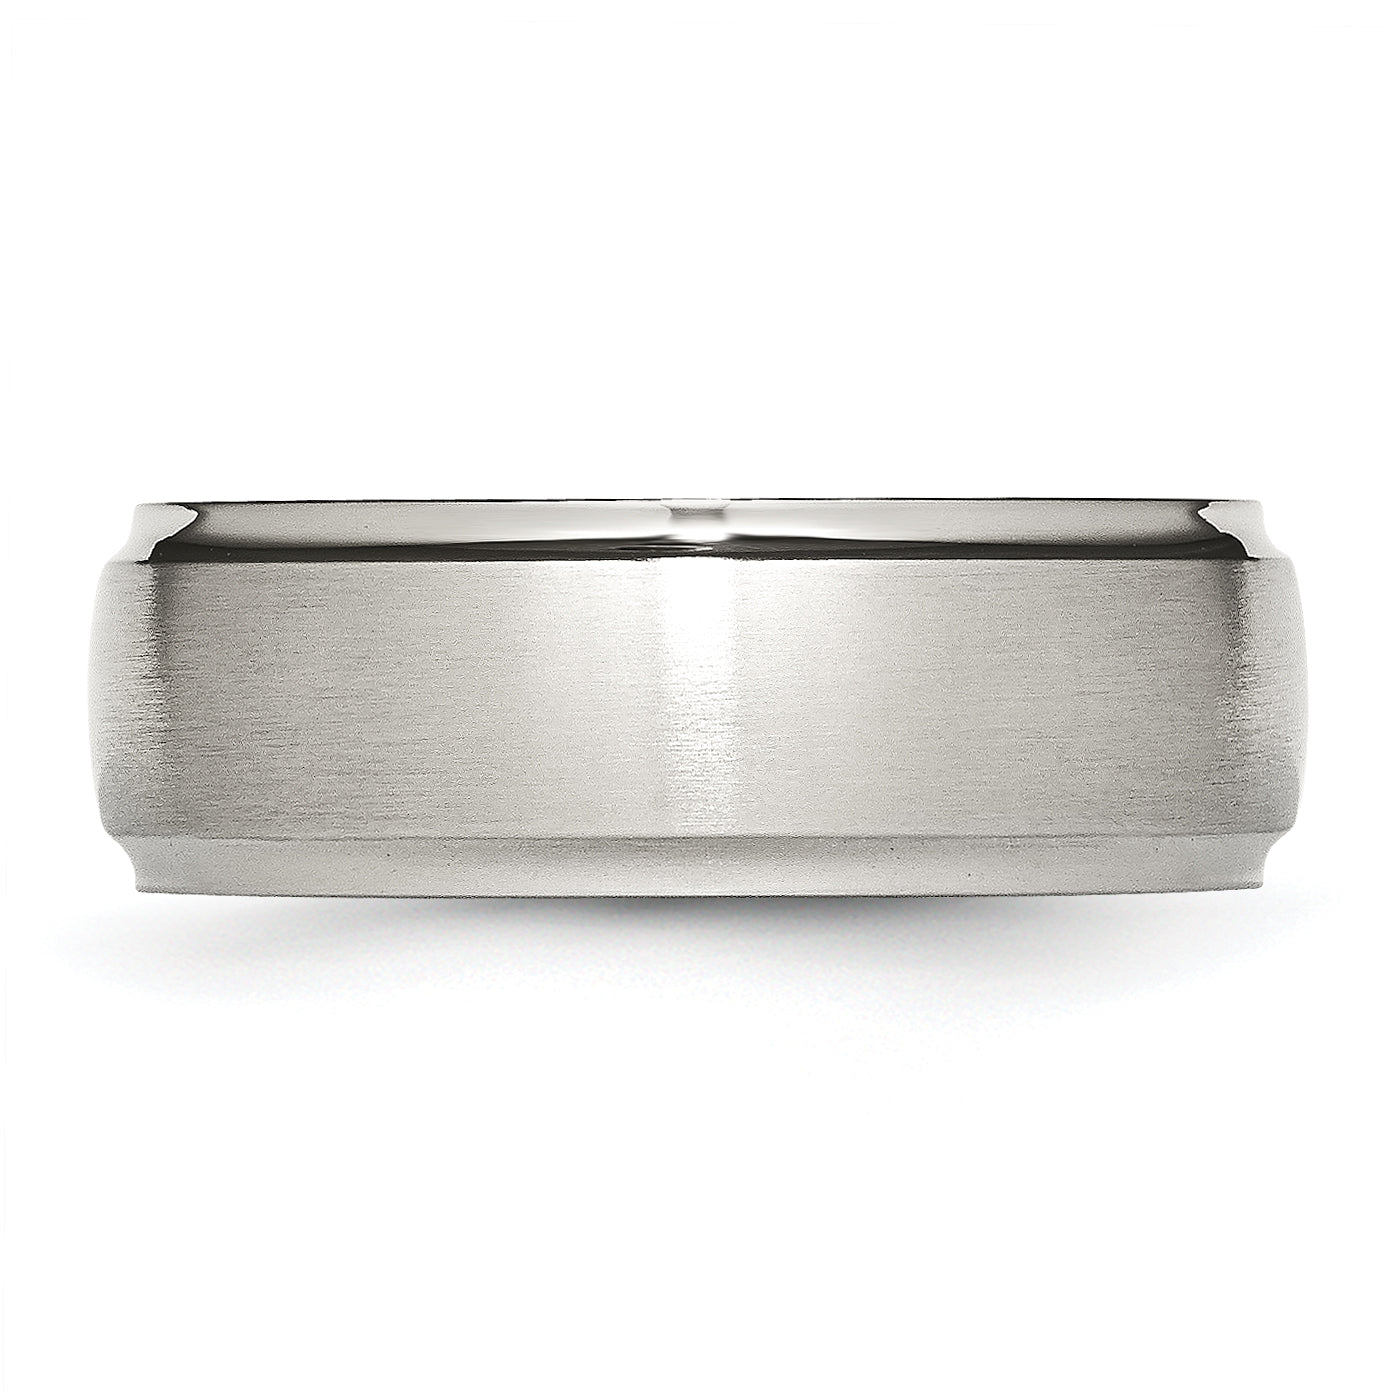 Stainless Steel Polished with Brushed Center 8mm Ridged Edge Band